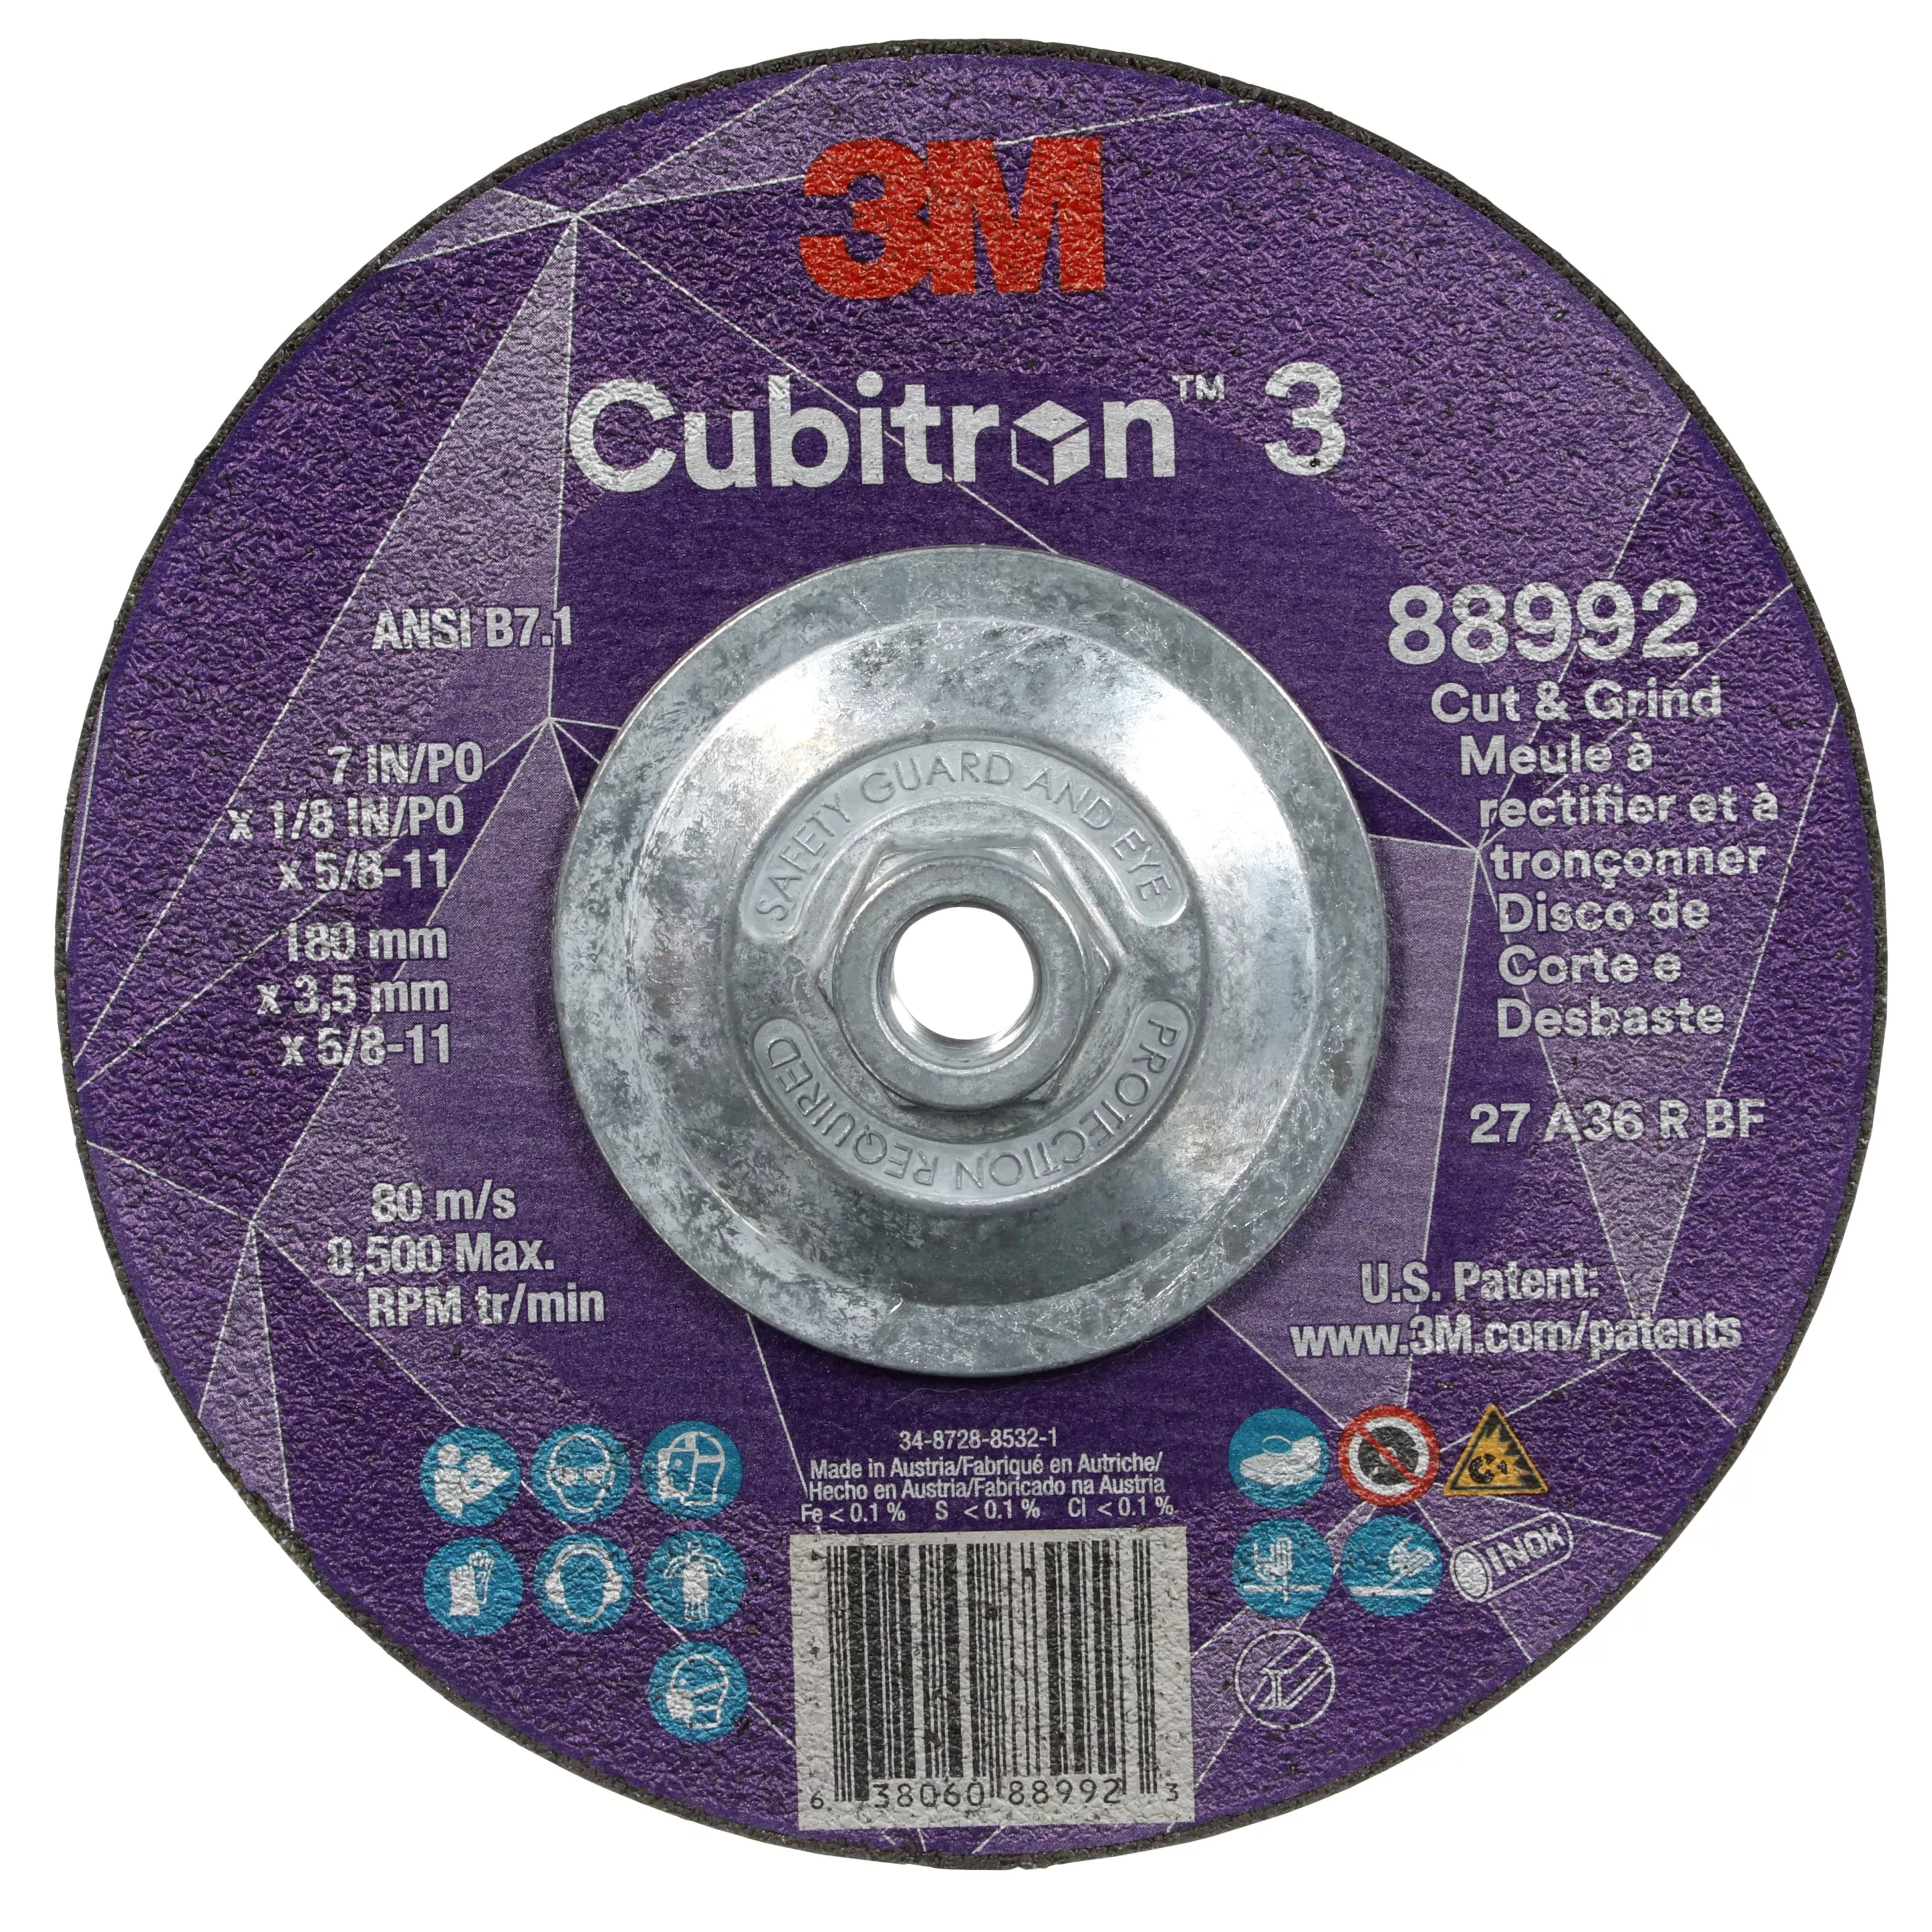 3M™ Cubitron™ 3 Cut and Grind Wheel, 88992, 36+, T27, 7 in x 1/8 in x
5/8 in-11 (180 x 3.2 mm x 5/8-11 in), ANSI, 10 ea/Case